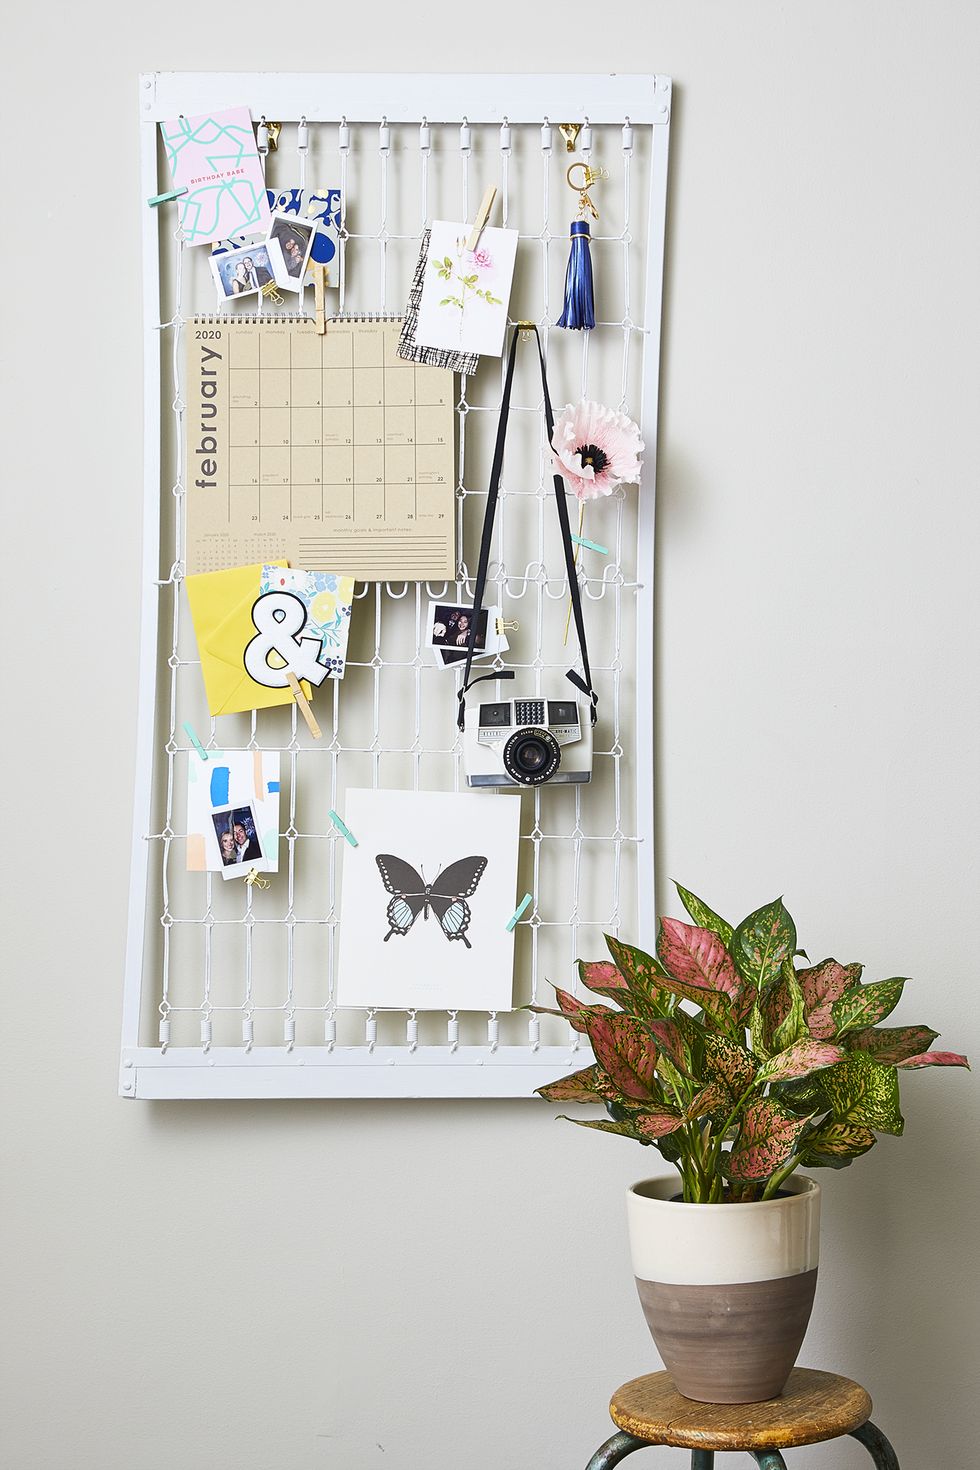 https://hips.hearstapps.com/hmg-prod/images/office-organization-ideas-upcycled-springs-1582819504.jpg?crop=1xw:0.99975xh;center,top&resize=980:*